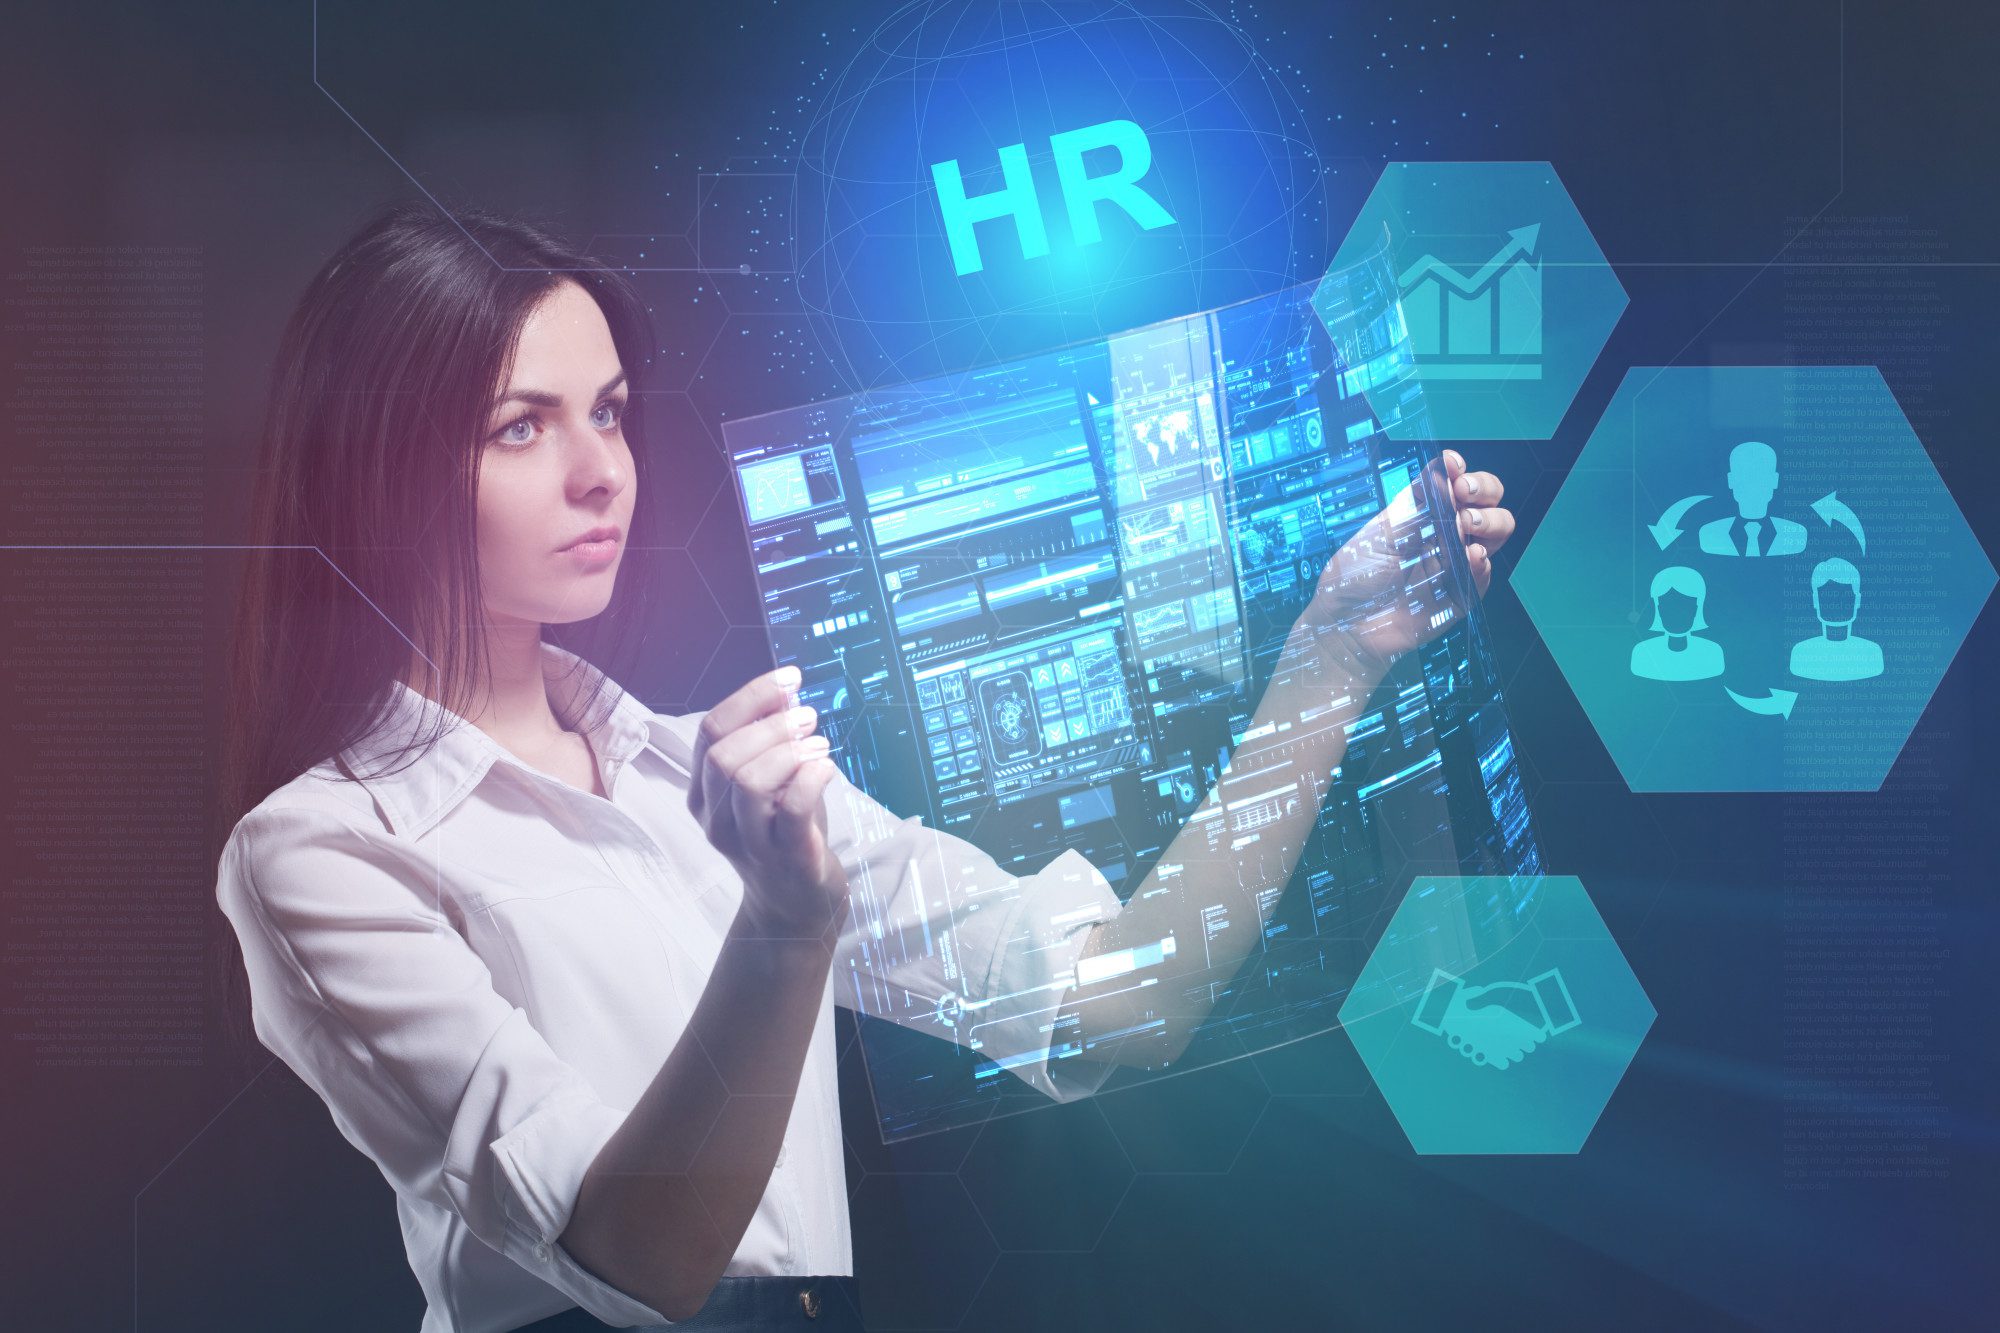 6 Smart Ways to Slash Your HR Costs Without Sacrificing Quality